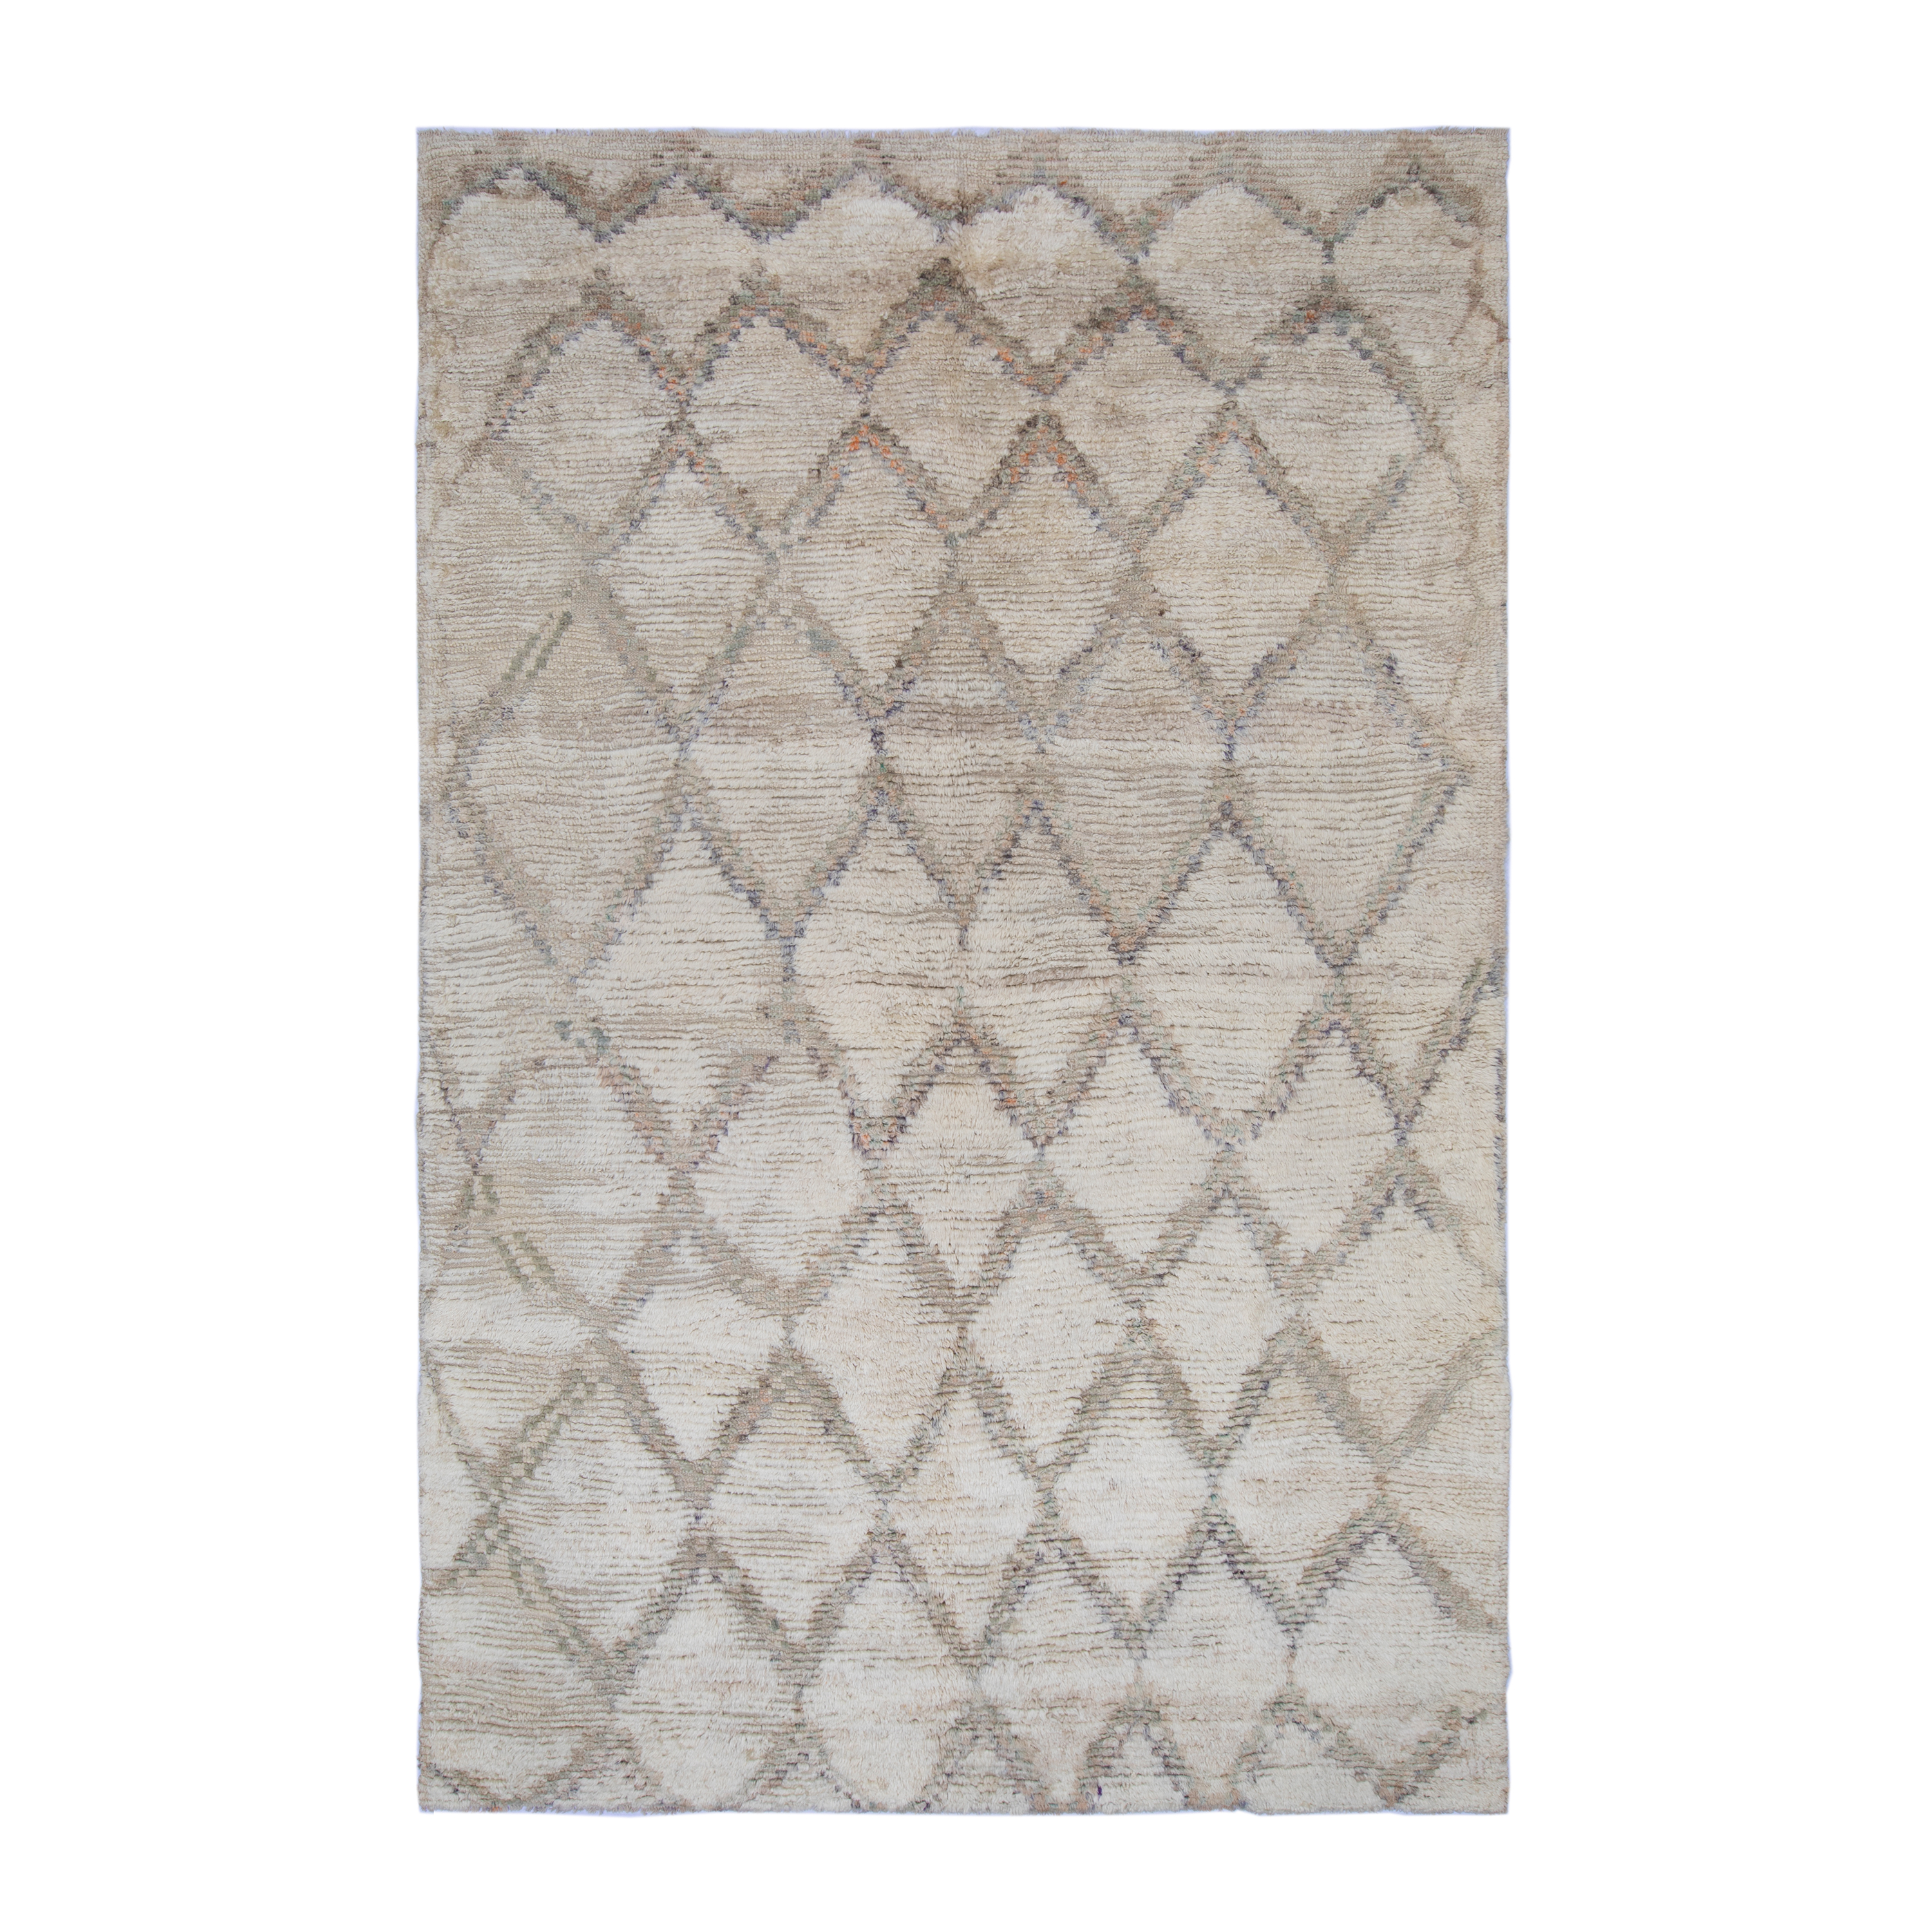 Our vintage Berber Moroccan rug is part of our a skillfully curated collection of rare and unusual designs.